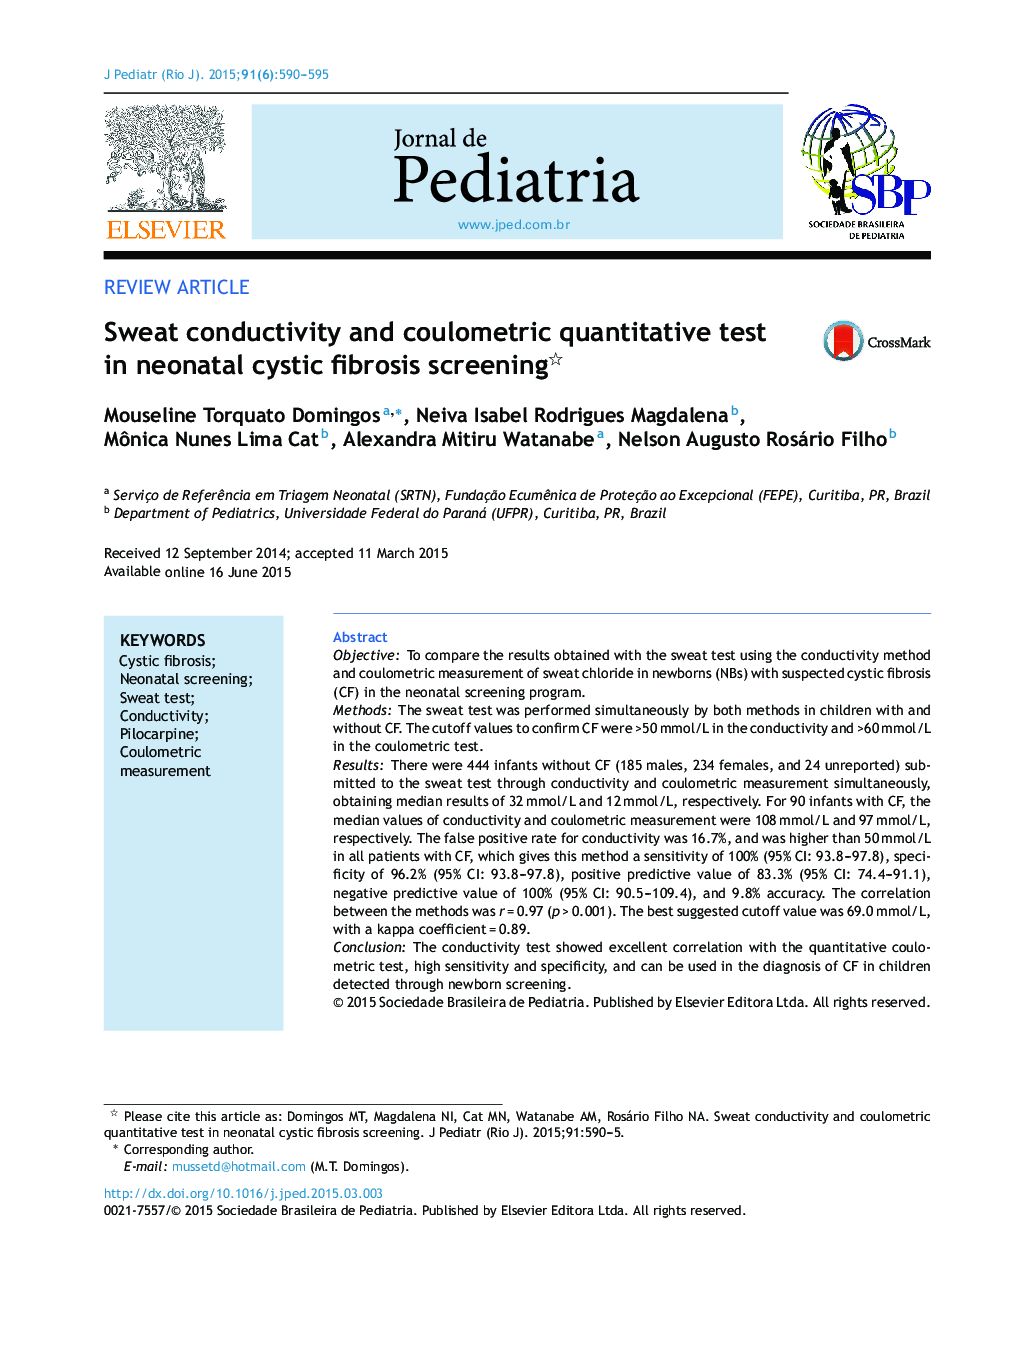 Sweat conductivity and coulometric quantitative test in neonatal cystic fibrosis screening 